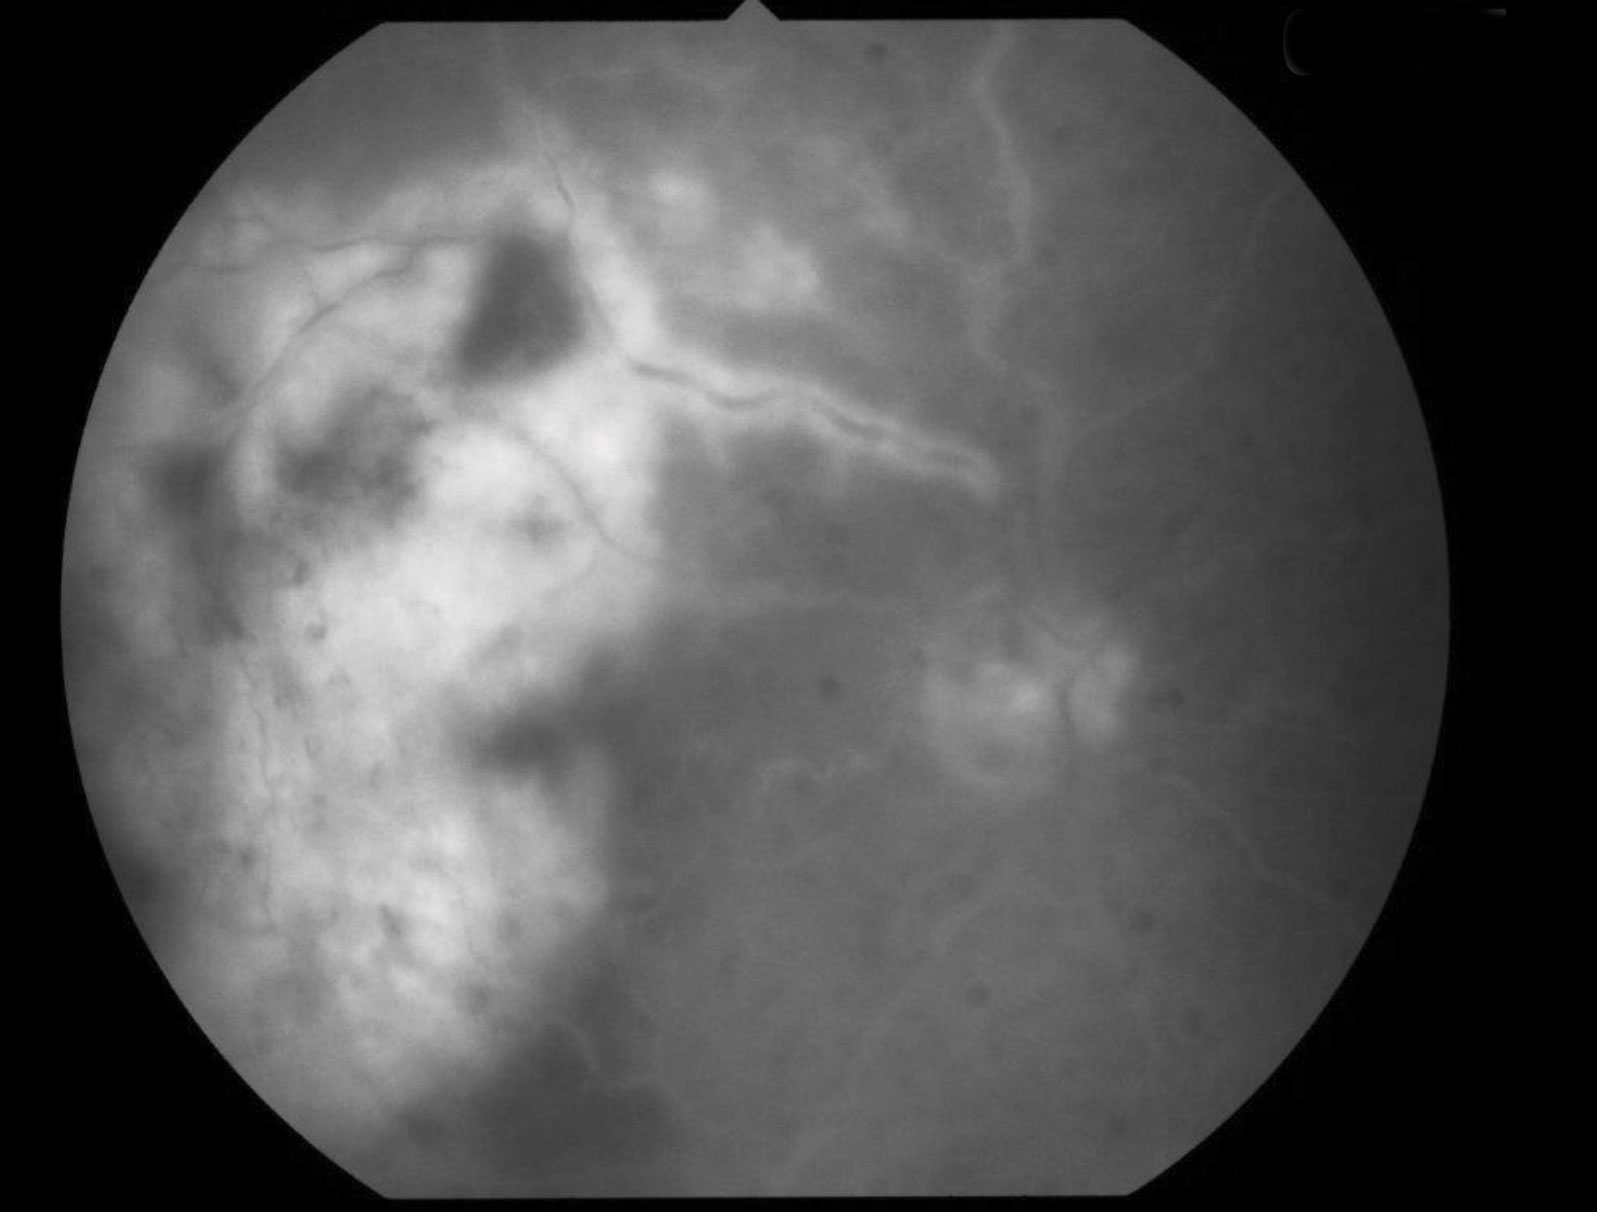 Fig. 3. Fluorescein angiography, seen here, can help identify filling defects of the retinal arteries caused by an occlusion.